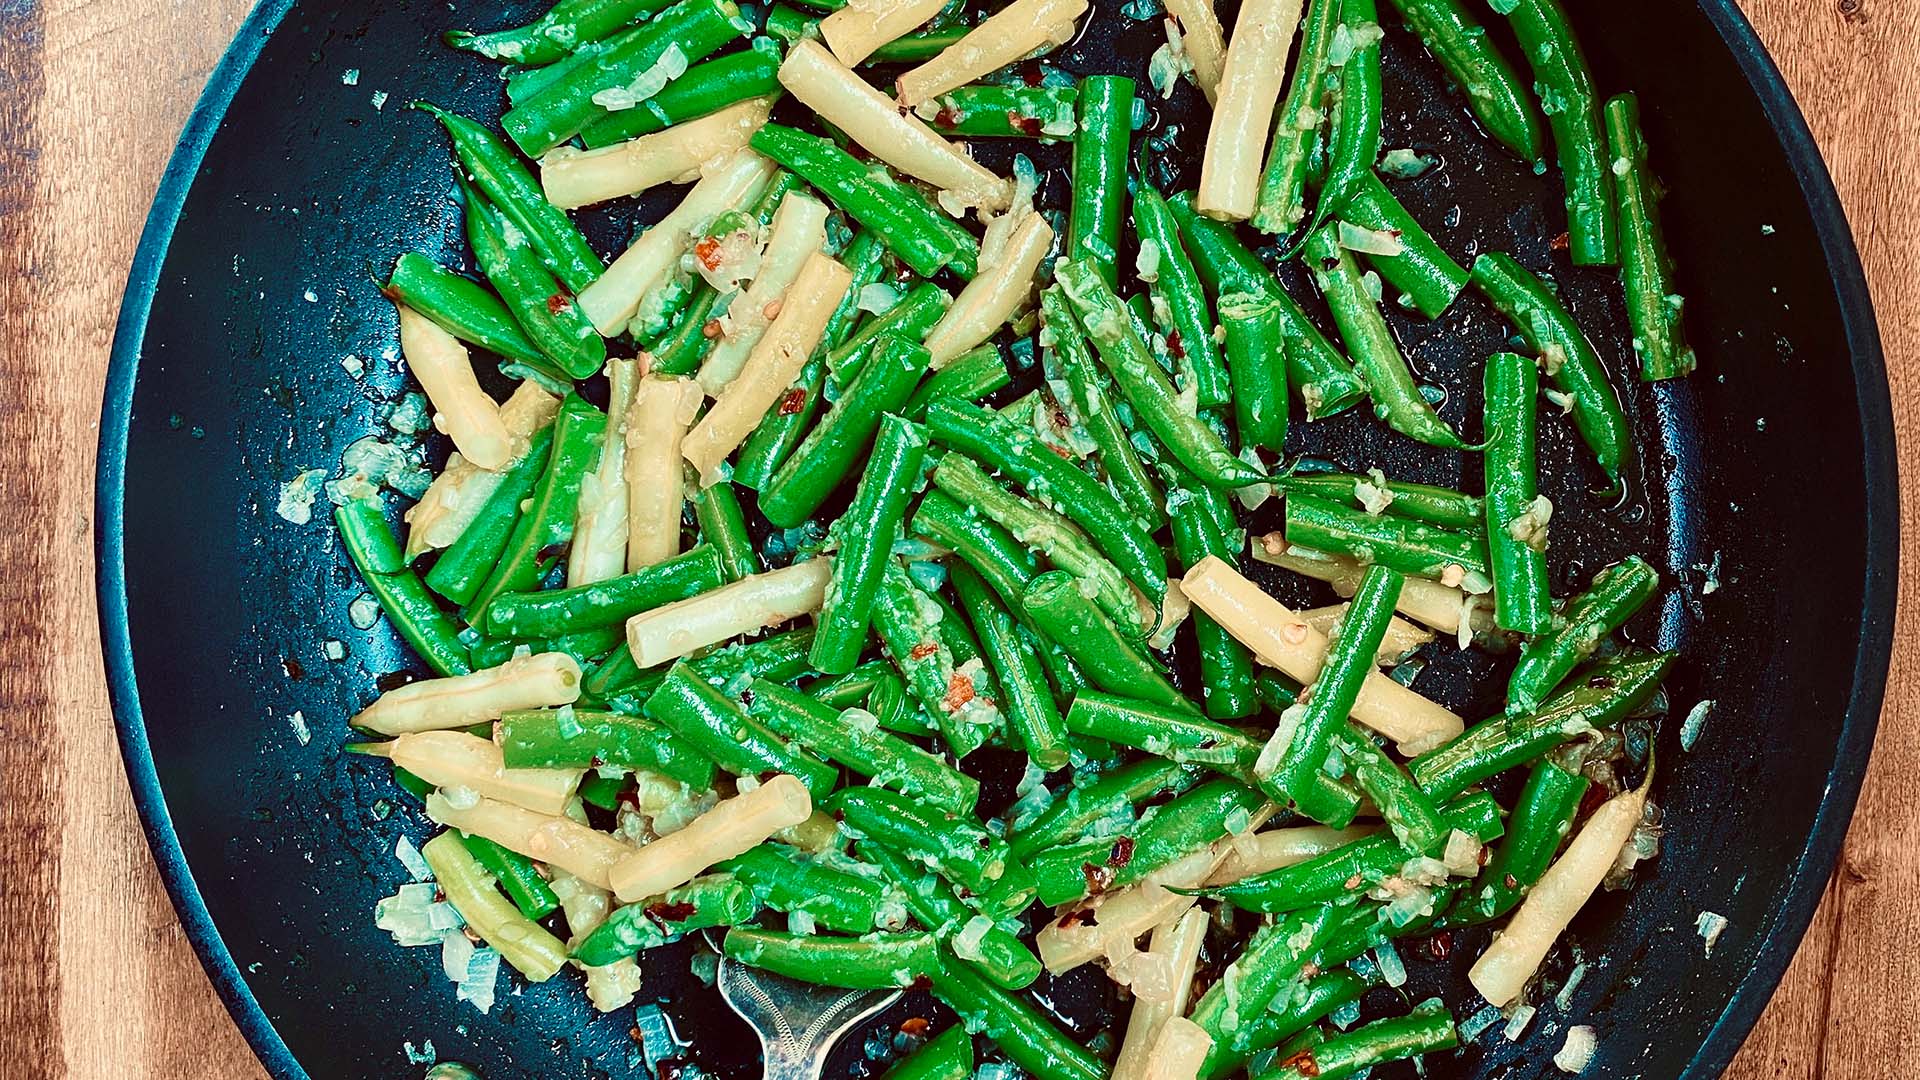 Simple sautéed green beans with shallots and garlic